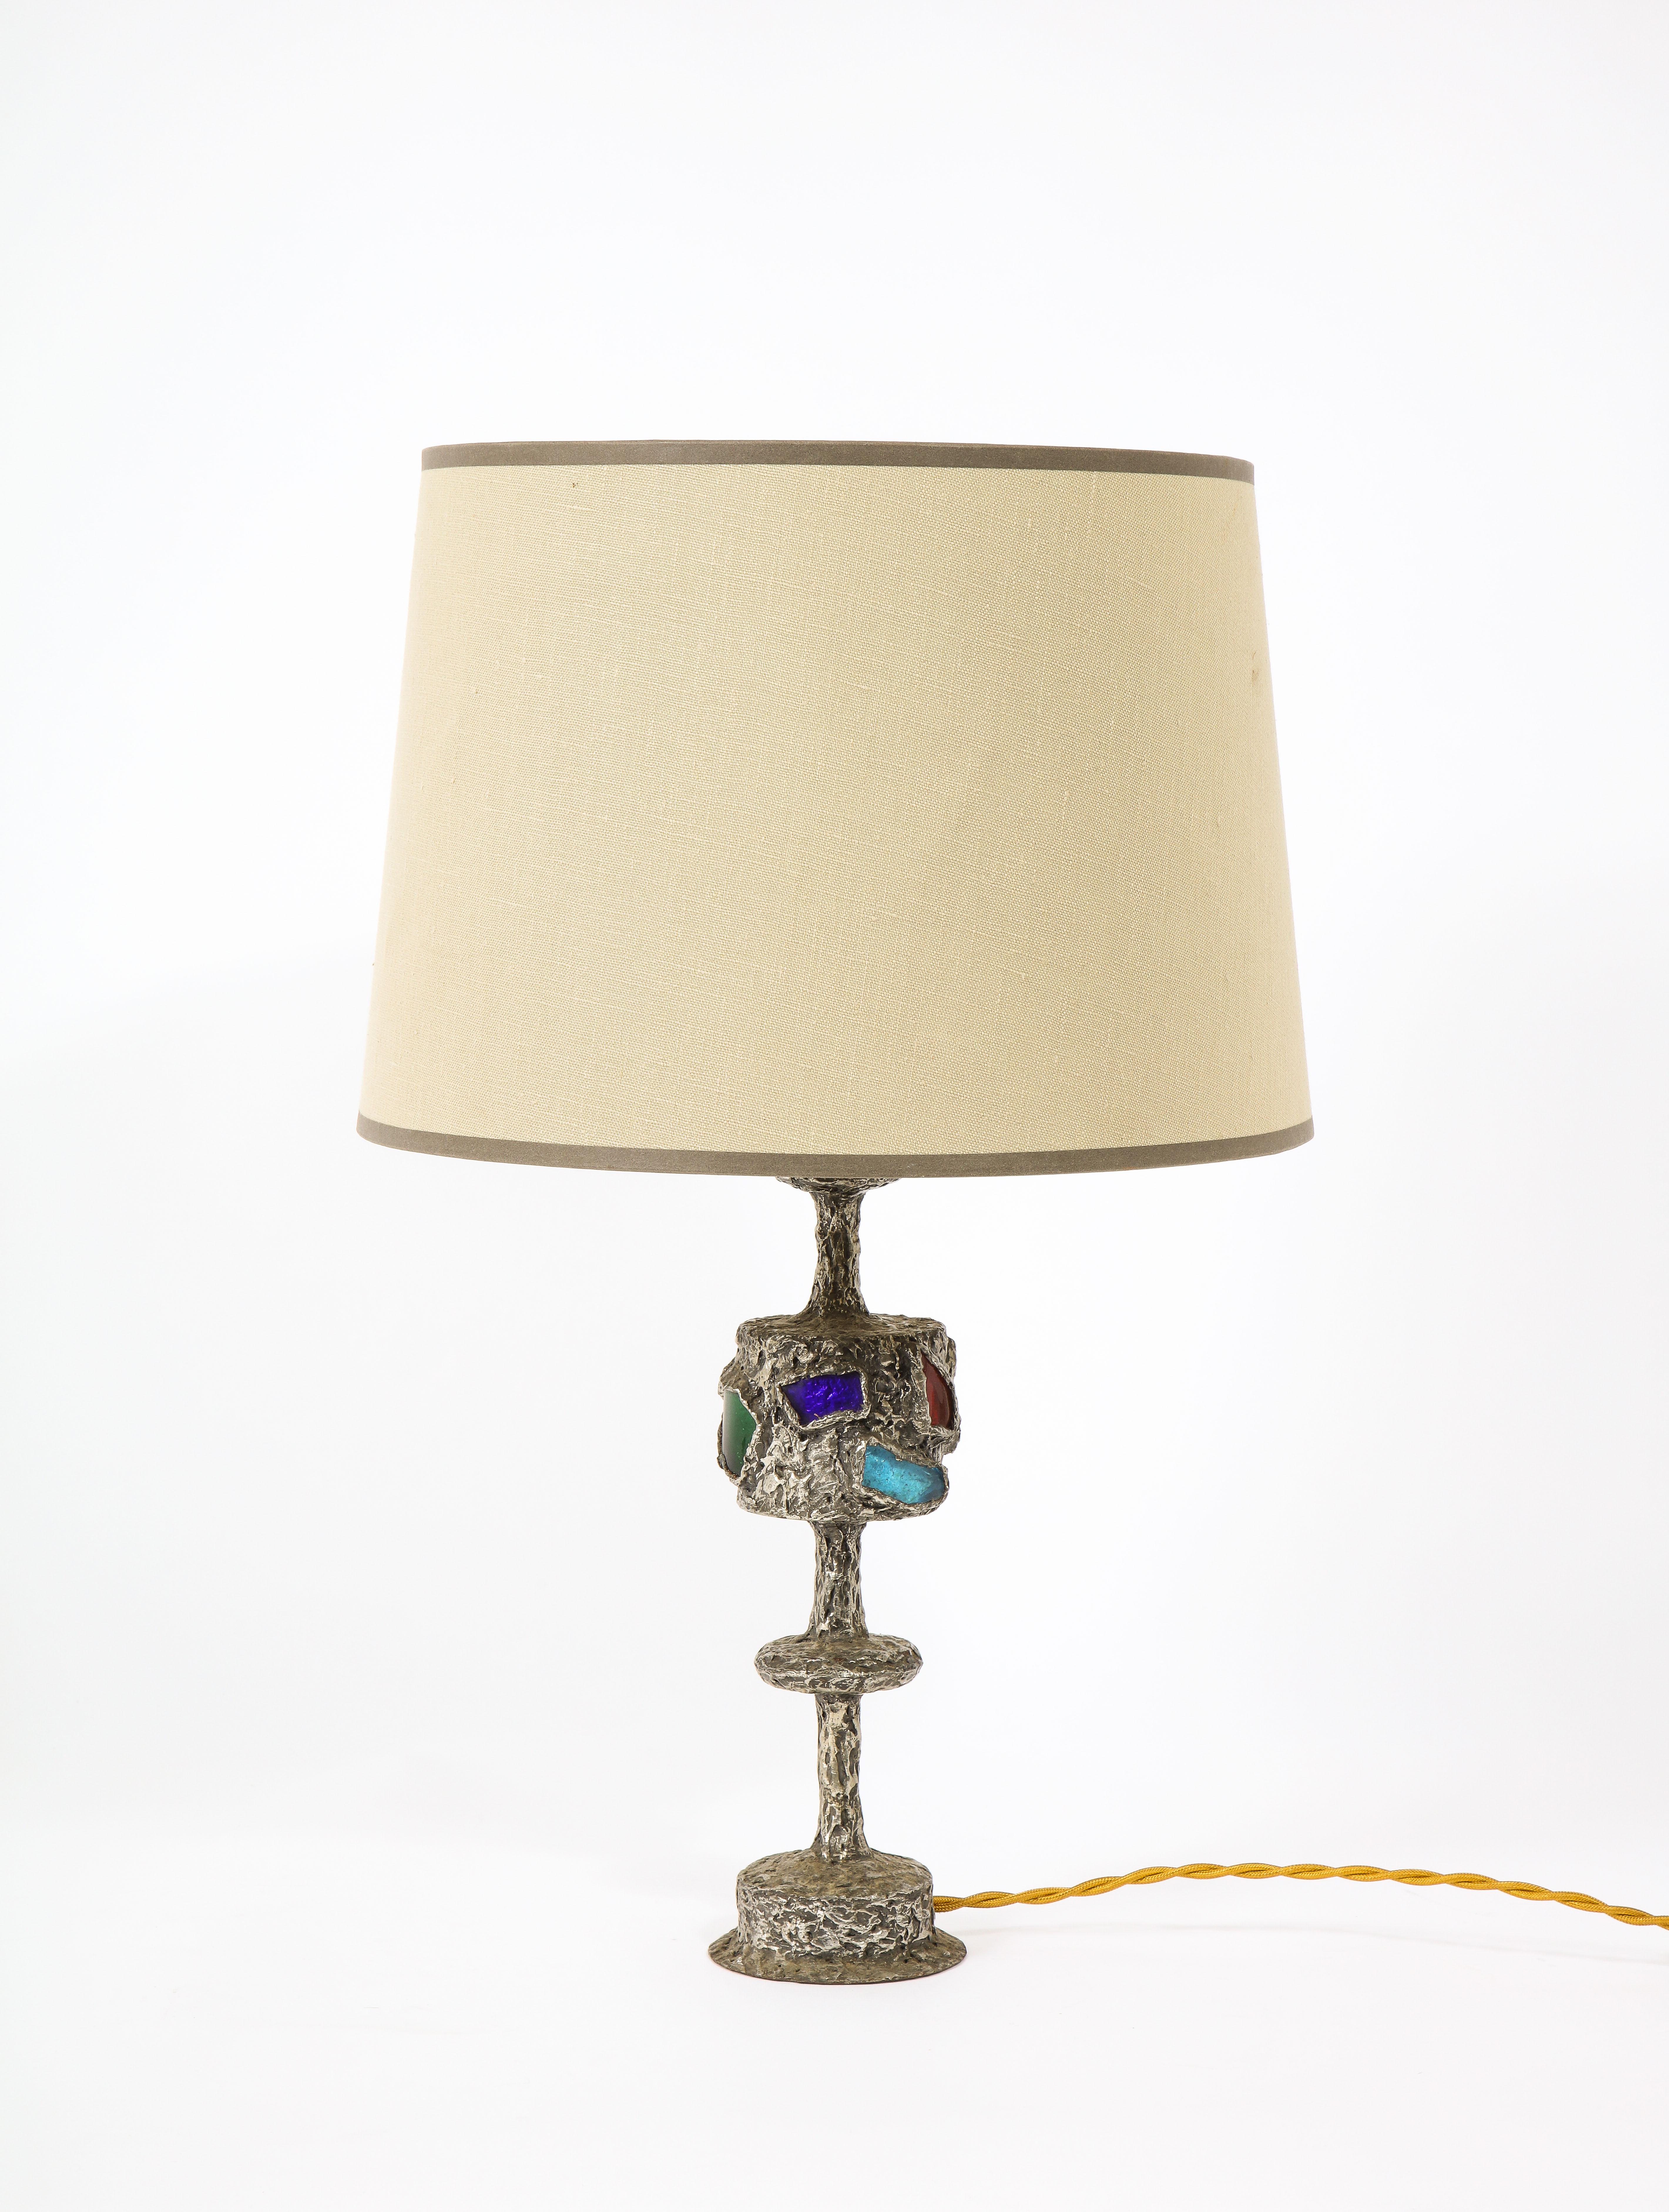 Pewter & Art Glass Table Lamp by R. Trameau, France, 1960's In Good Condition For Sale In New York, NY